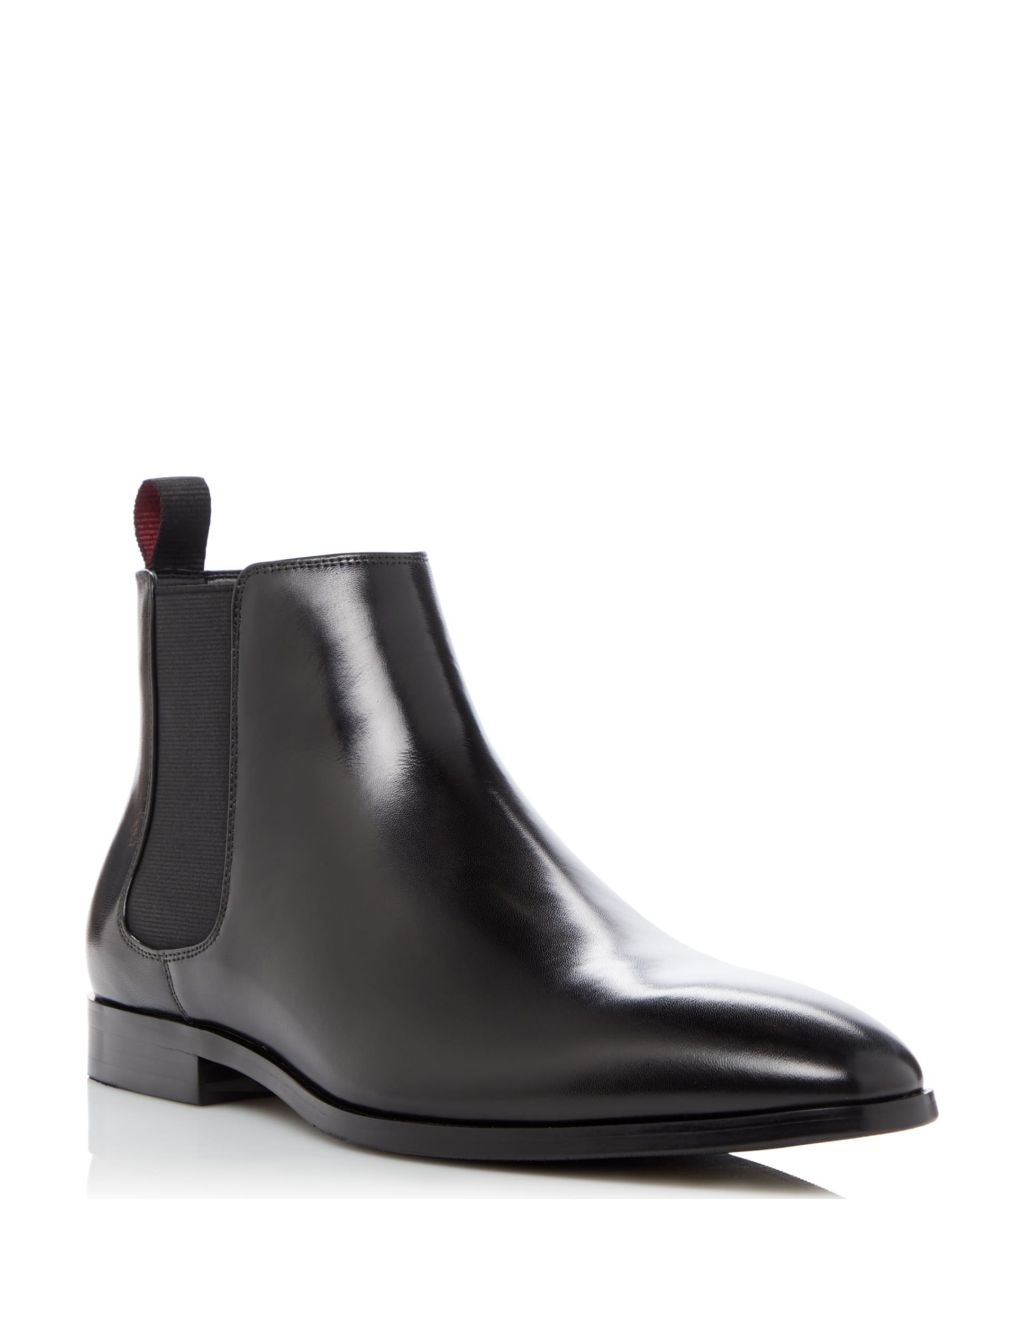 Leather Pull-On Chelsea Boots | Dune London | M&S